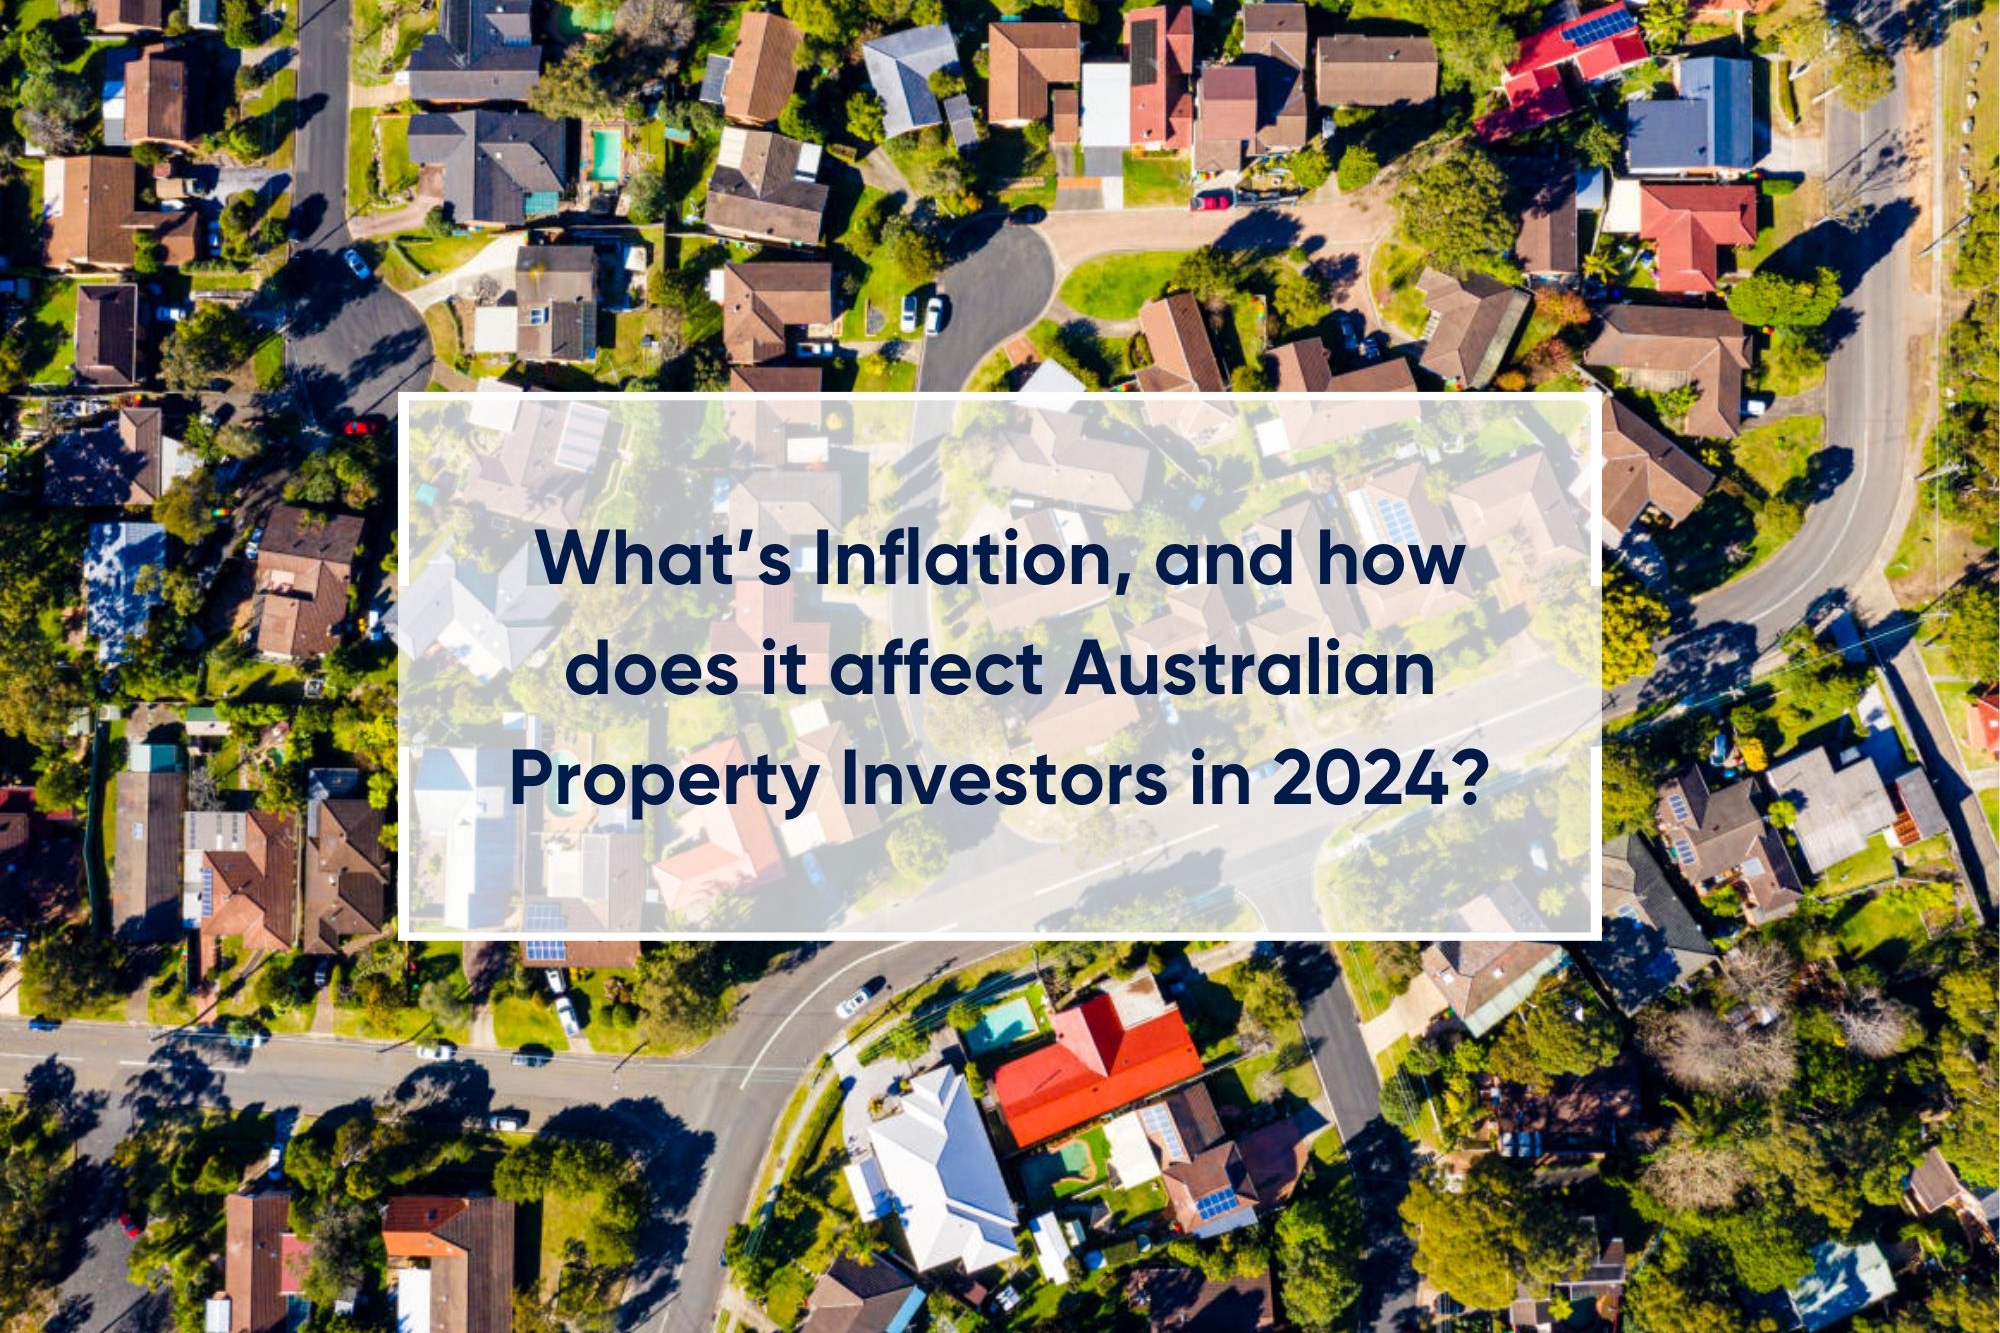 What’s Inflation, and how does it affect Australian Property Investors in 2024?